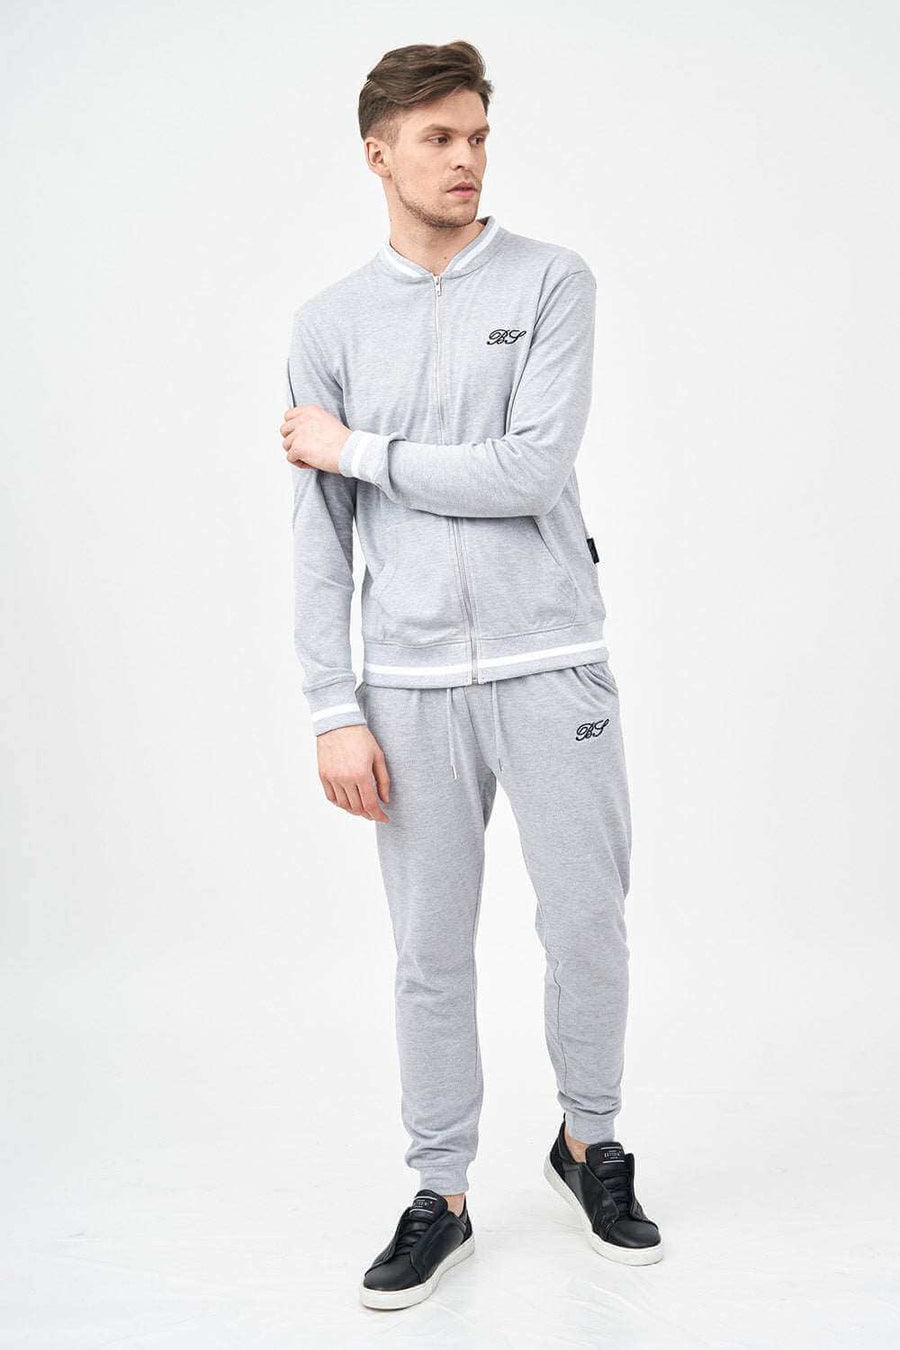 Front Posture of Men's Tracksuit Set with Contrast Rib